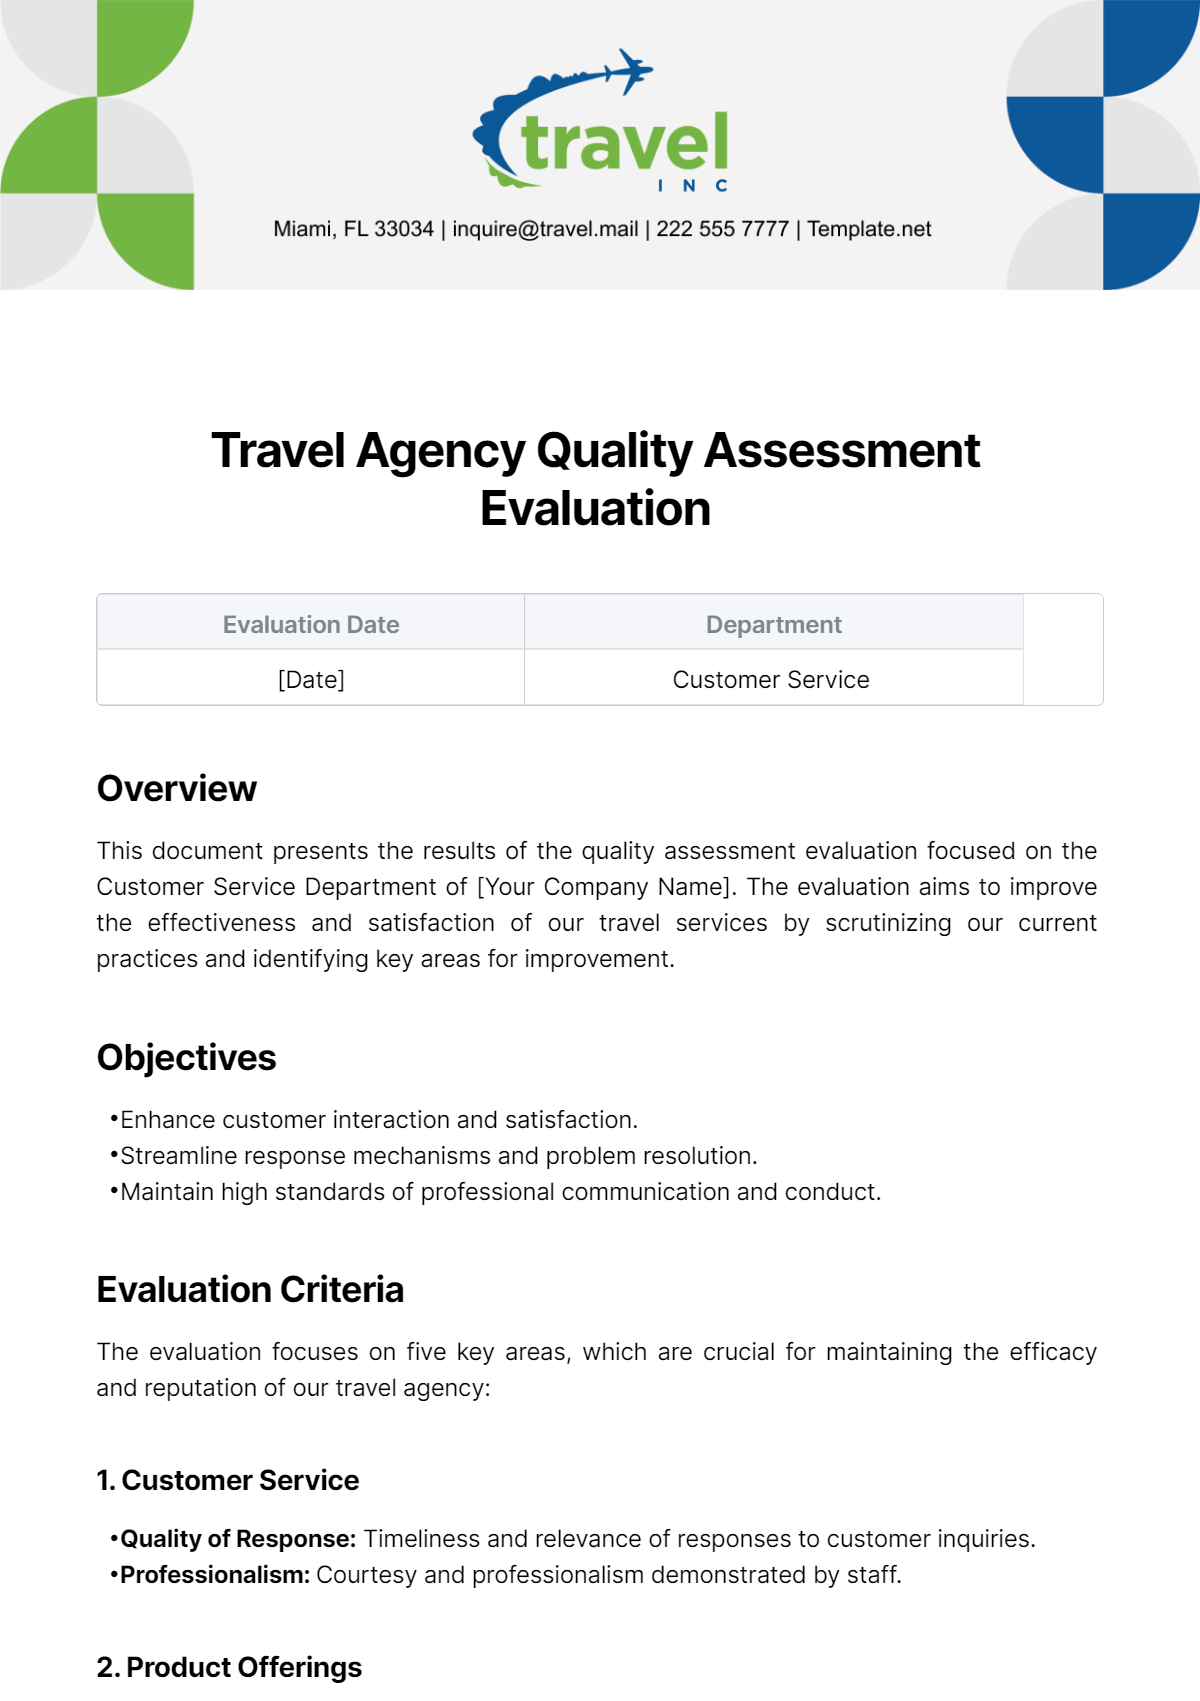 Travel Agency Quality Assessment Evaluation Template